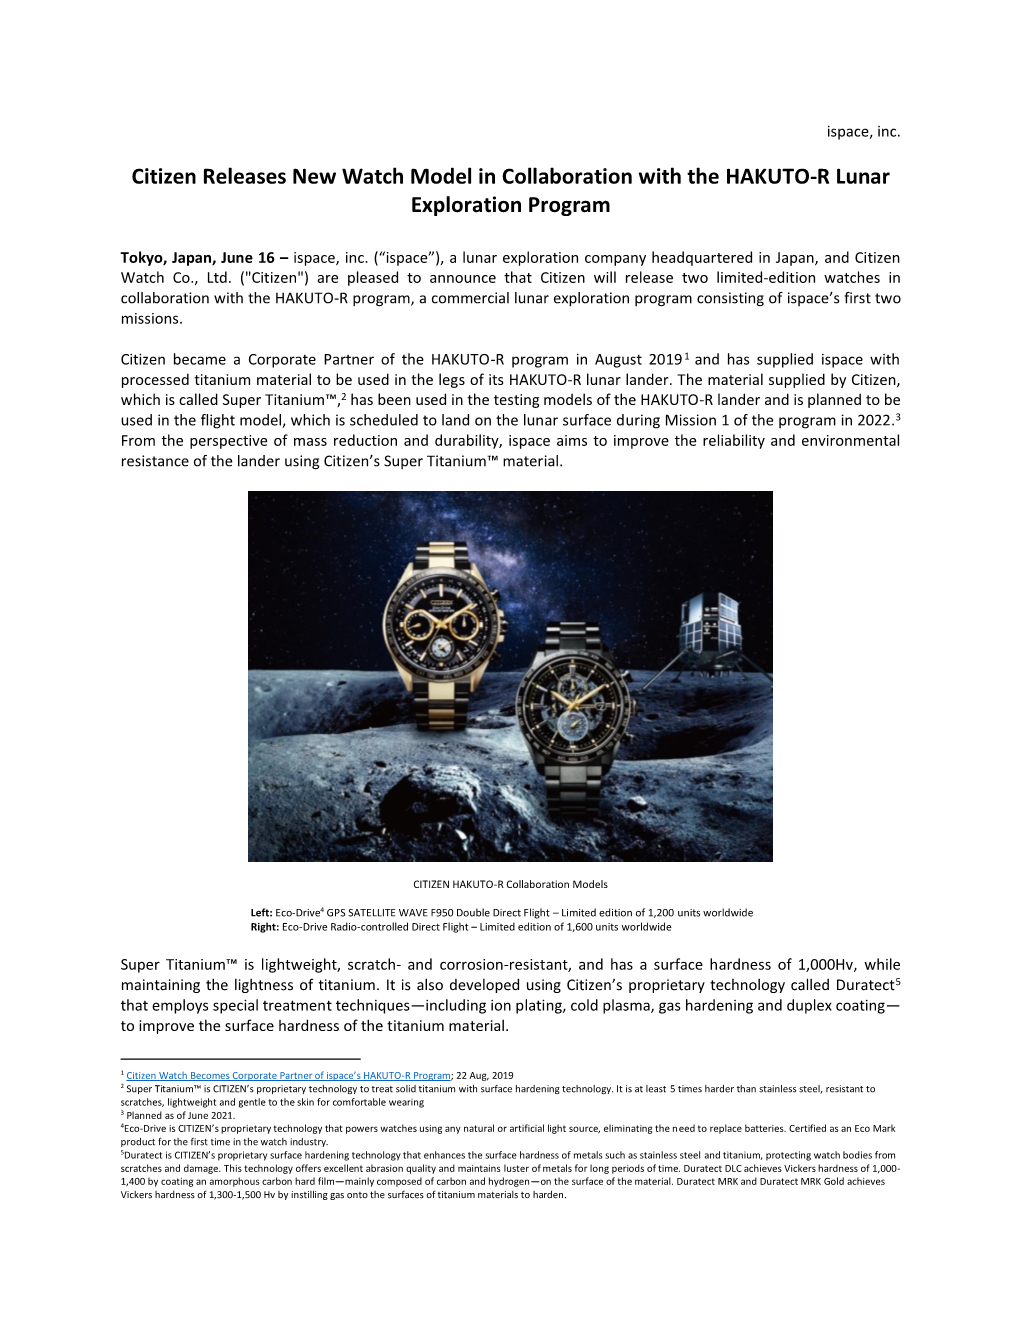 Citizen Releases New Watch Model in Collaboration with the HAKUTO-R Lunar Exploration Program